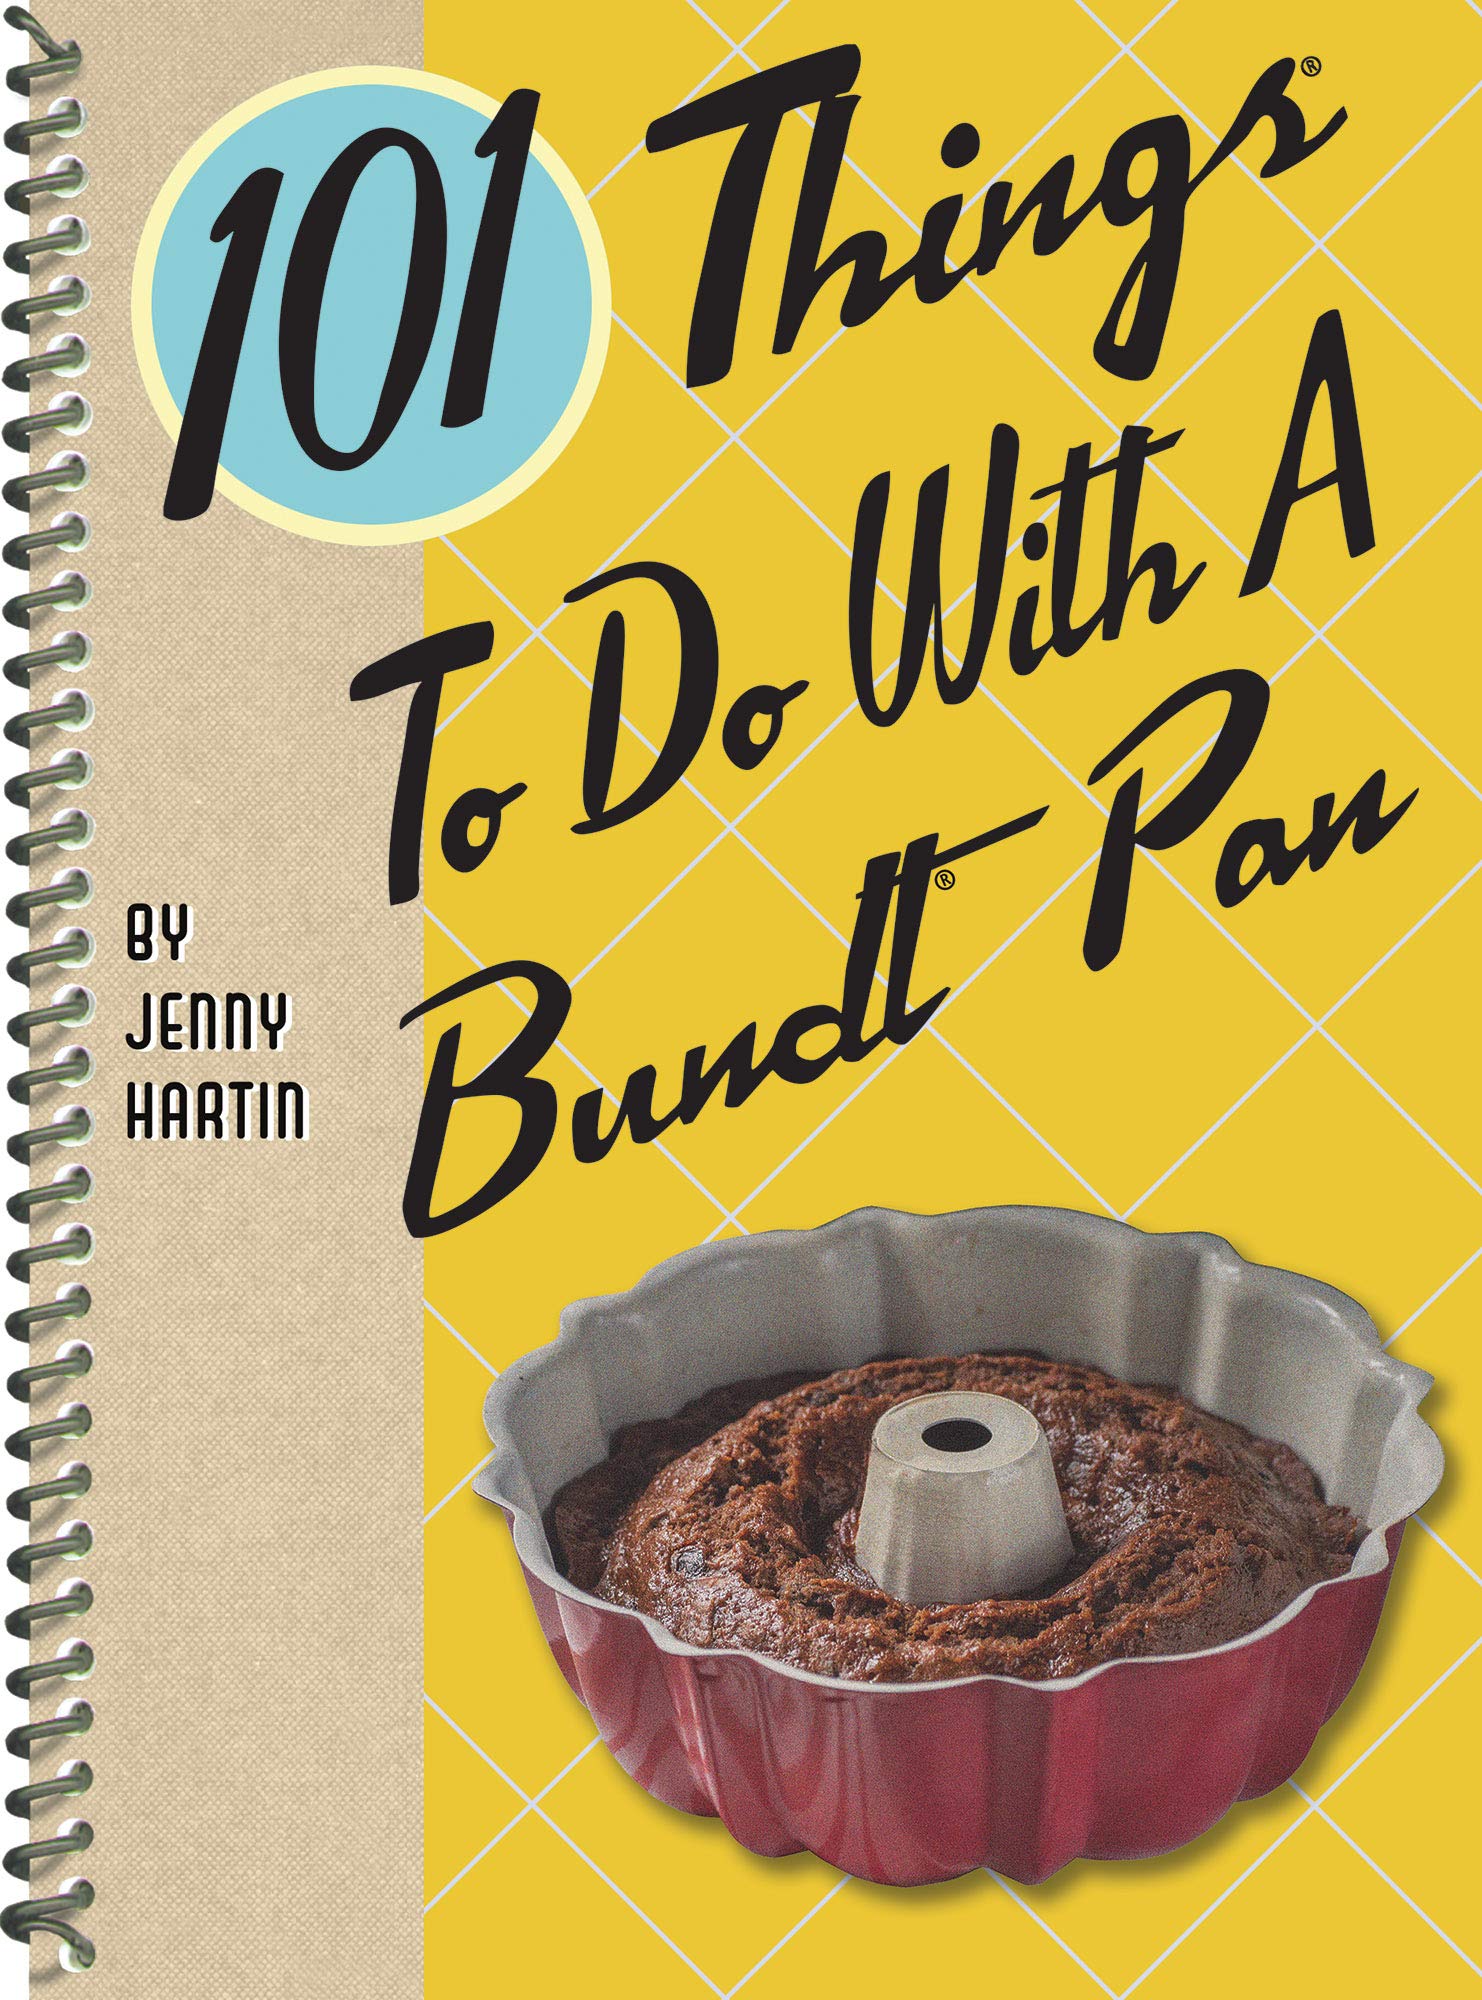 101 Things to Do With a Bundt® Pan (101 Cookbooks)